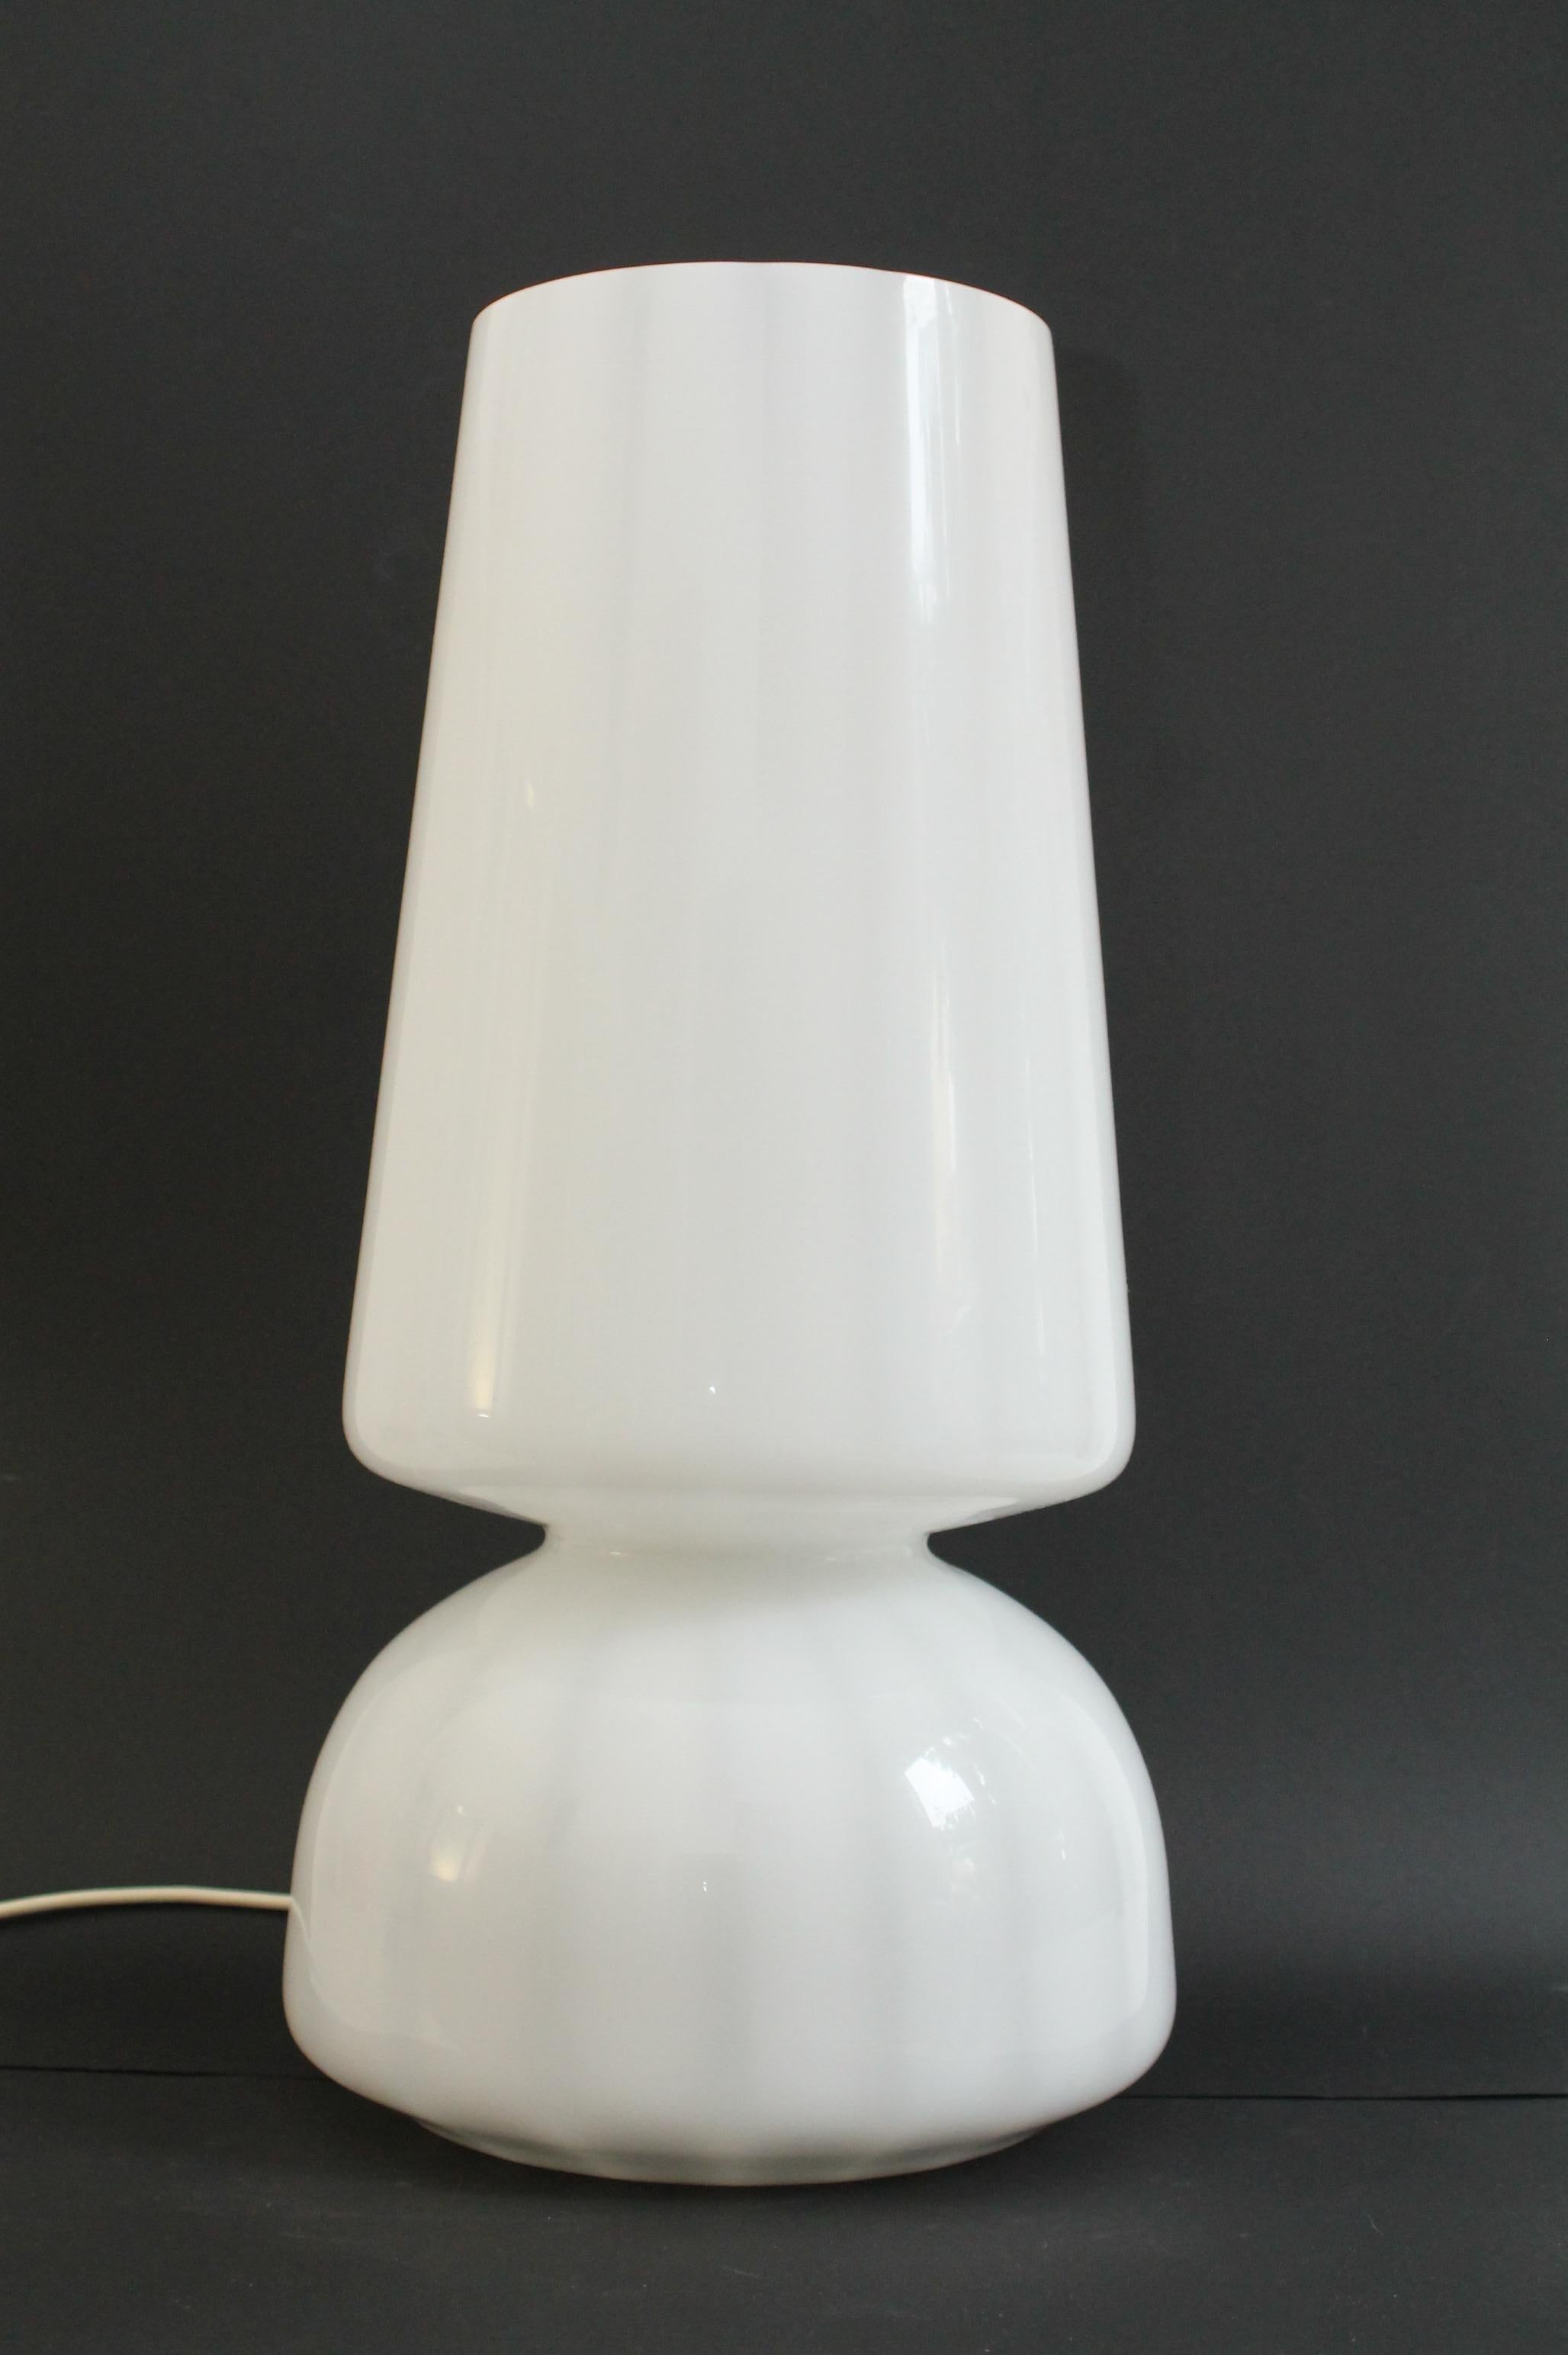 Murano Glass Iconic Vintage table lamp (60cm height) by Veluce 70's Murano Table Glass Lamp 